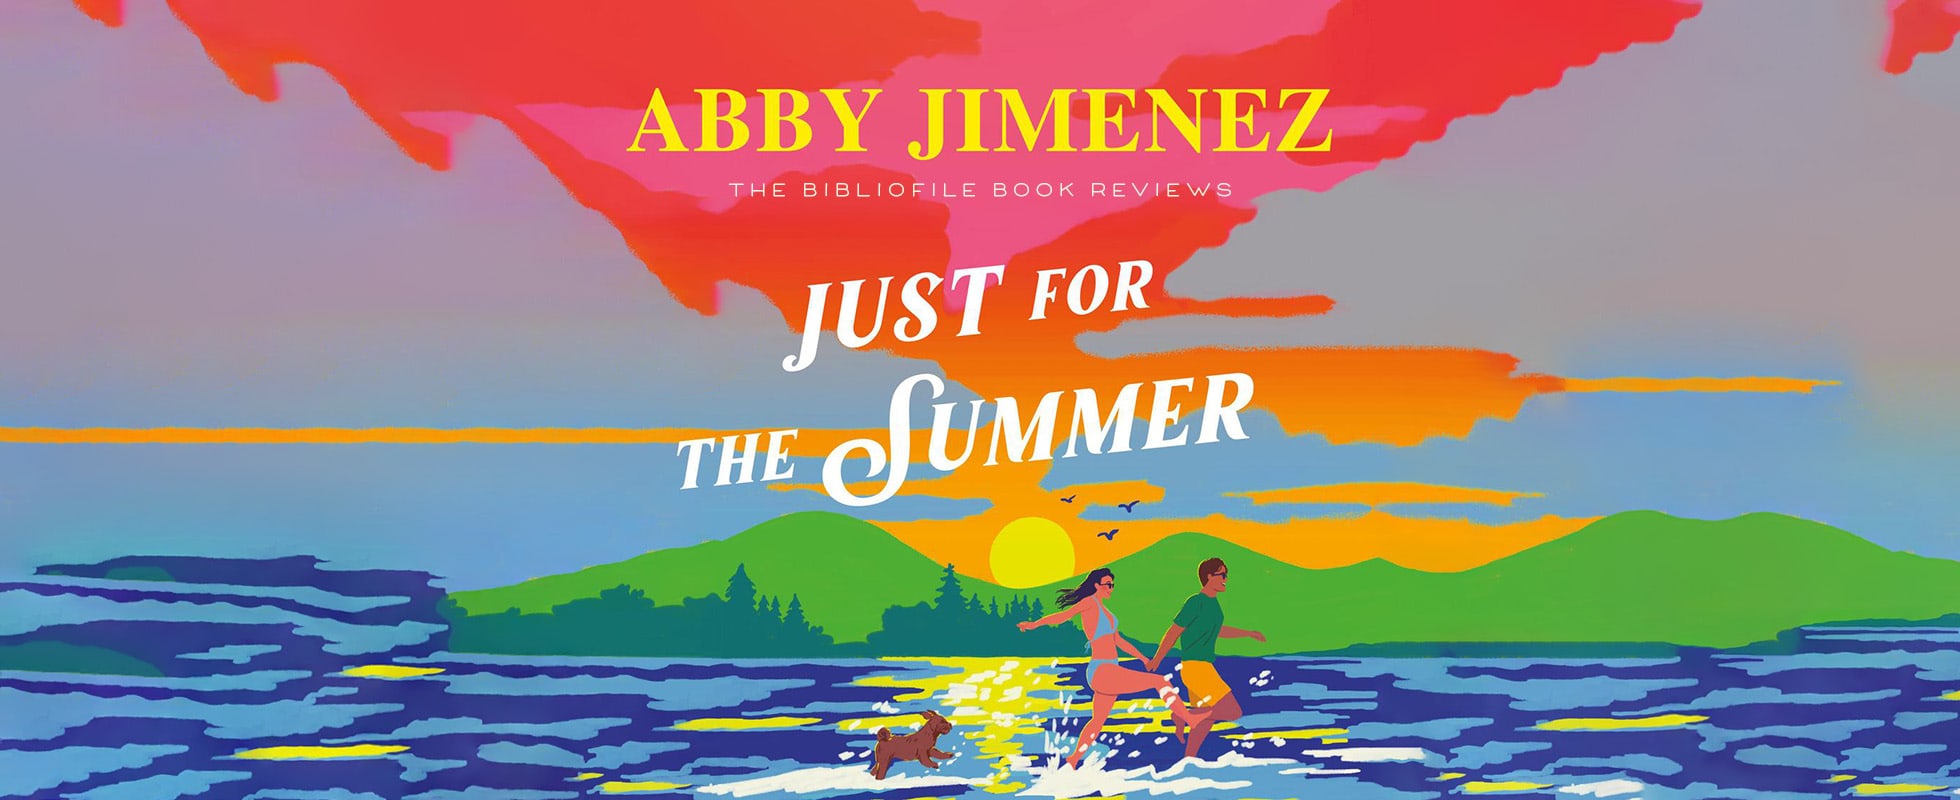 just for the summer by abby jimenez book review plot summary synopsis recap spoilers